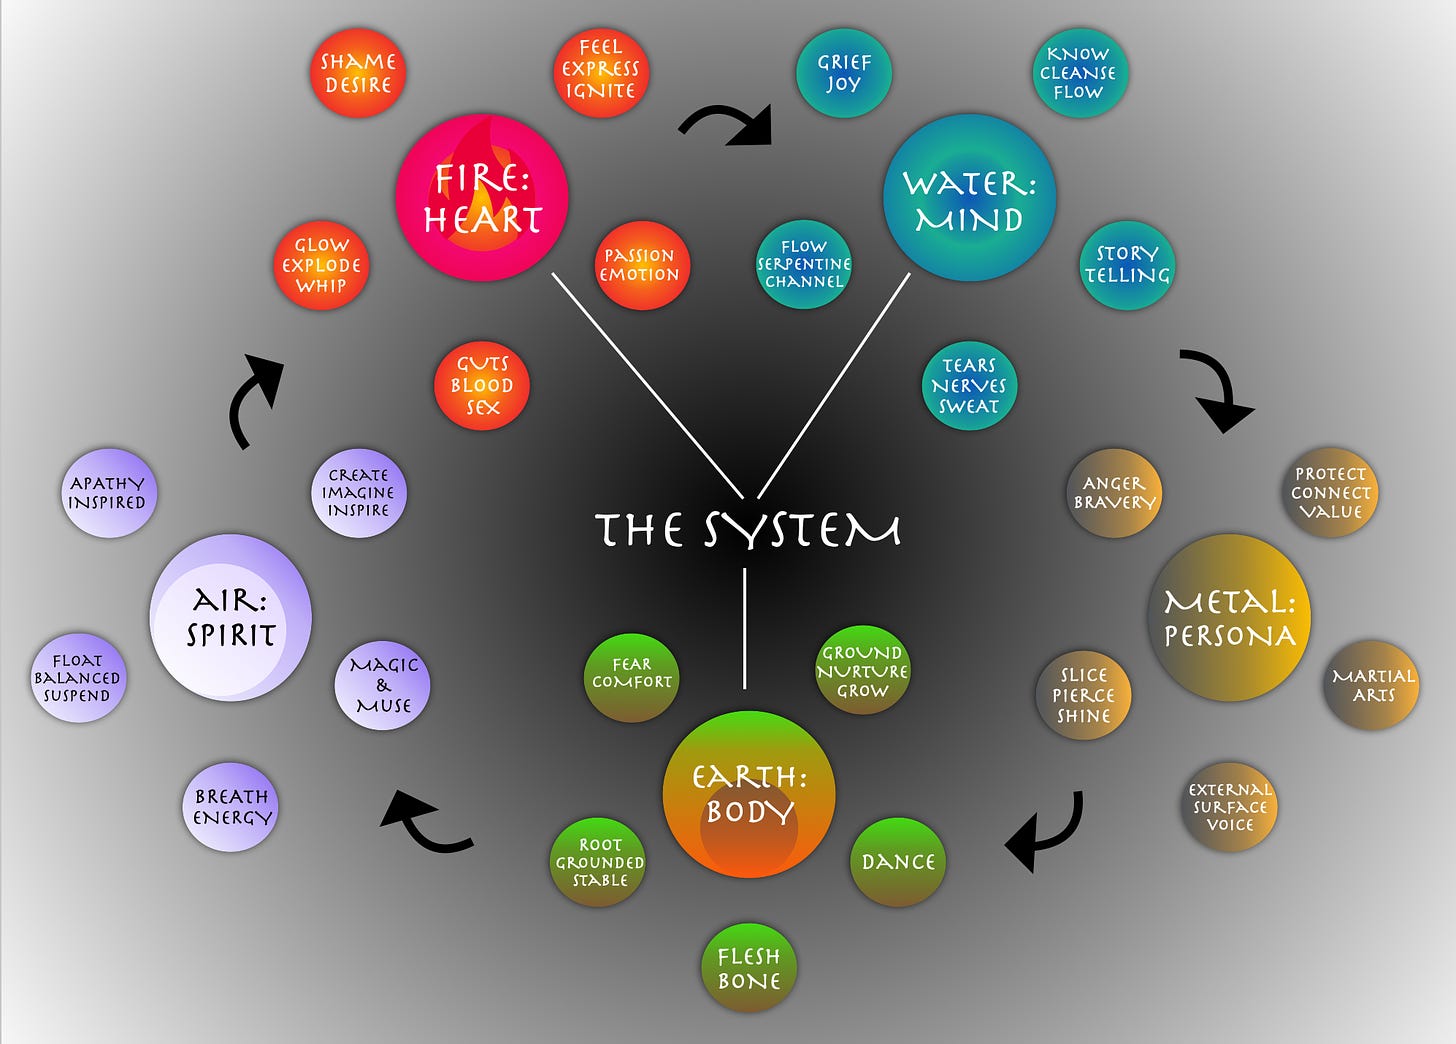 The System: the five Elements as above, now each with their five moons in their corresponding colors. Earth: green/orange. Air: purple/white. Fire: red/pink. Water: blue/green. Metal: silver/gold. For the gazillion details - subscribe and you'll learn them all as we go.